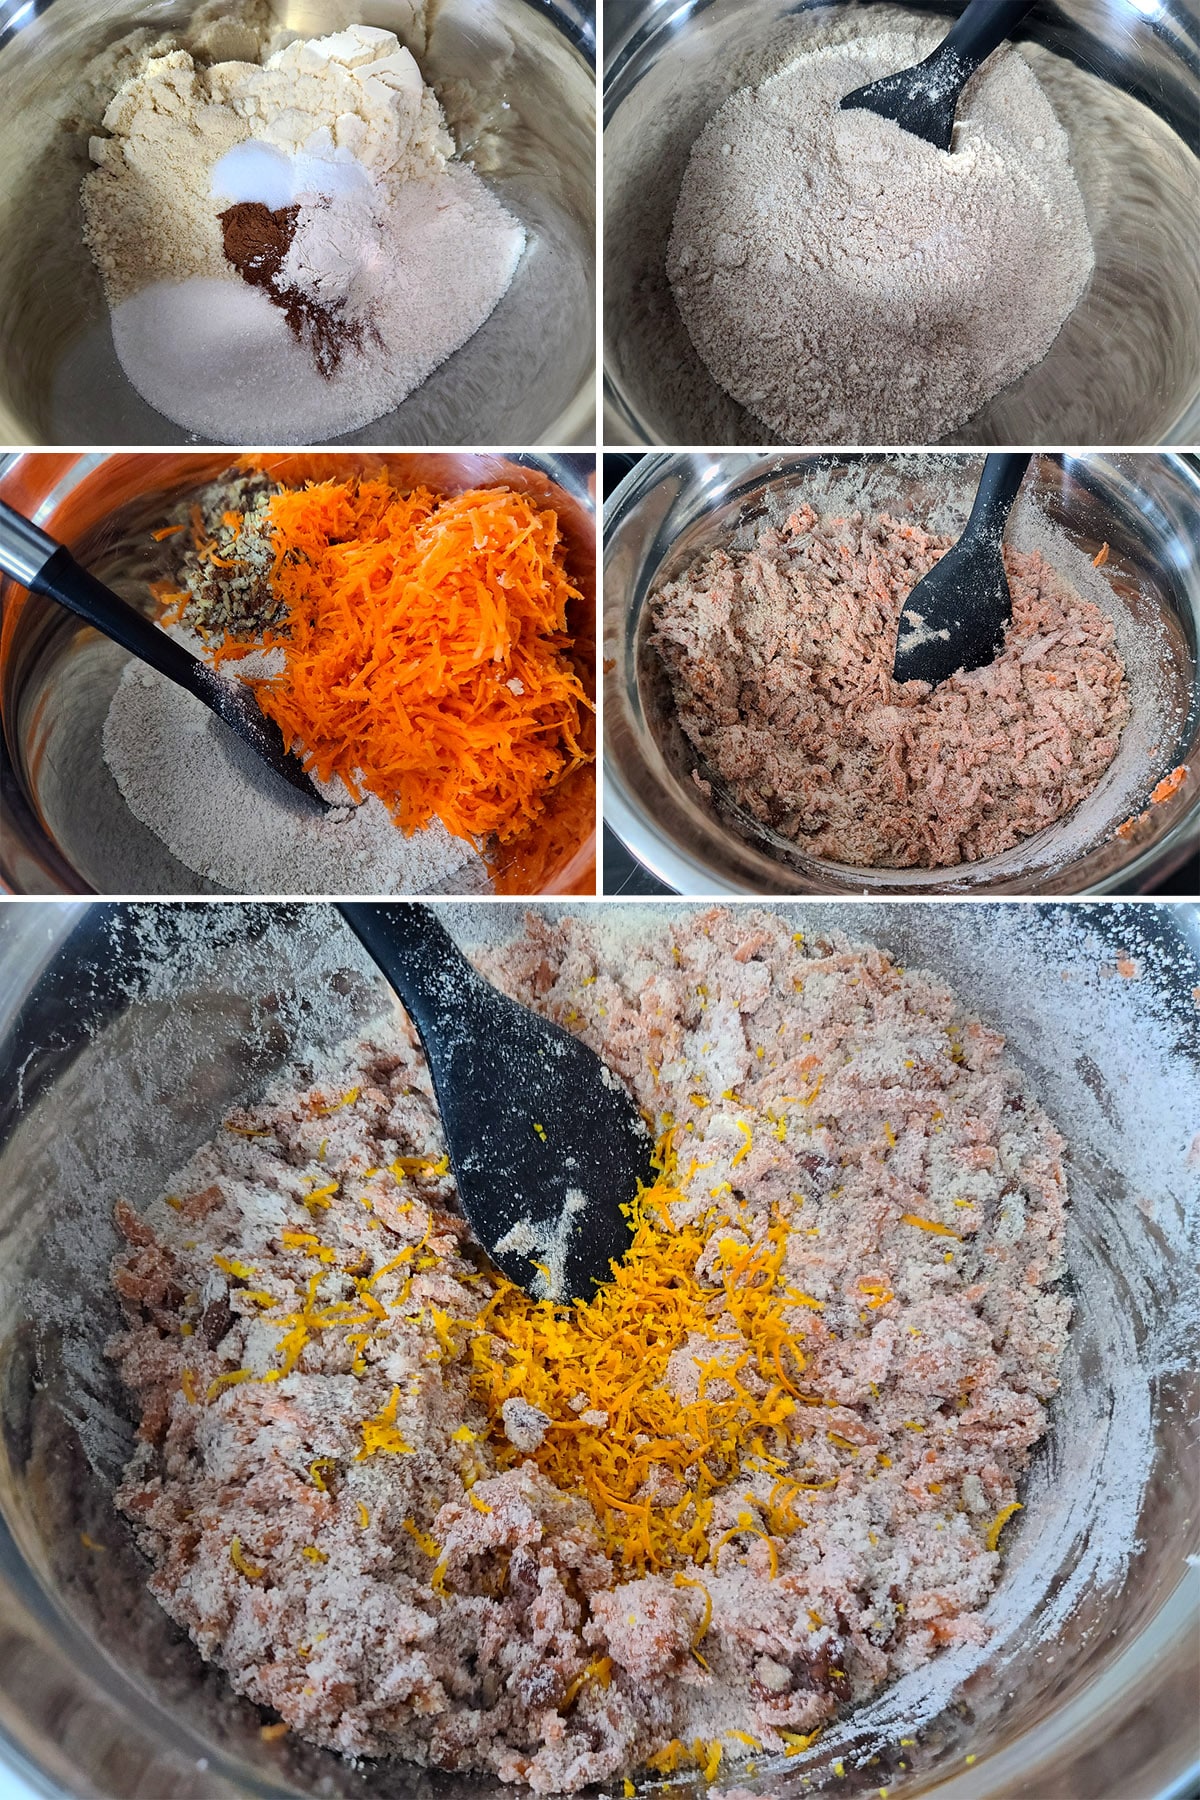 A 5 part image showing the dry ingredients being mixed, and the carrots added.